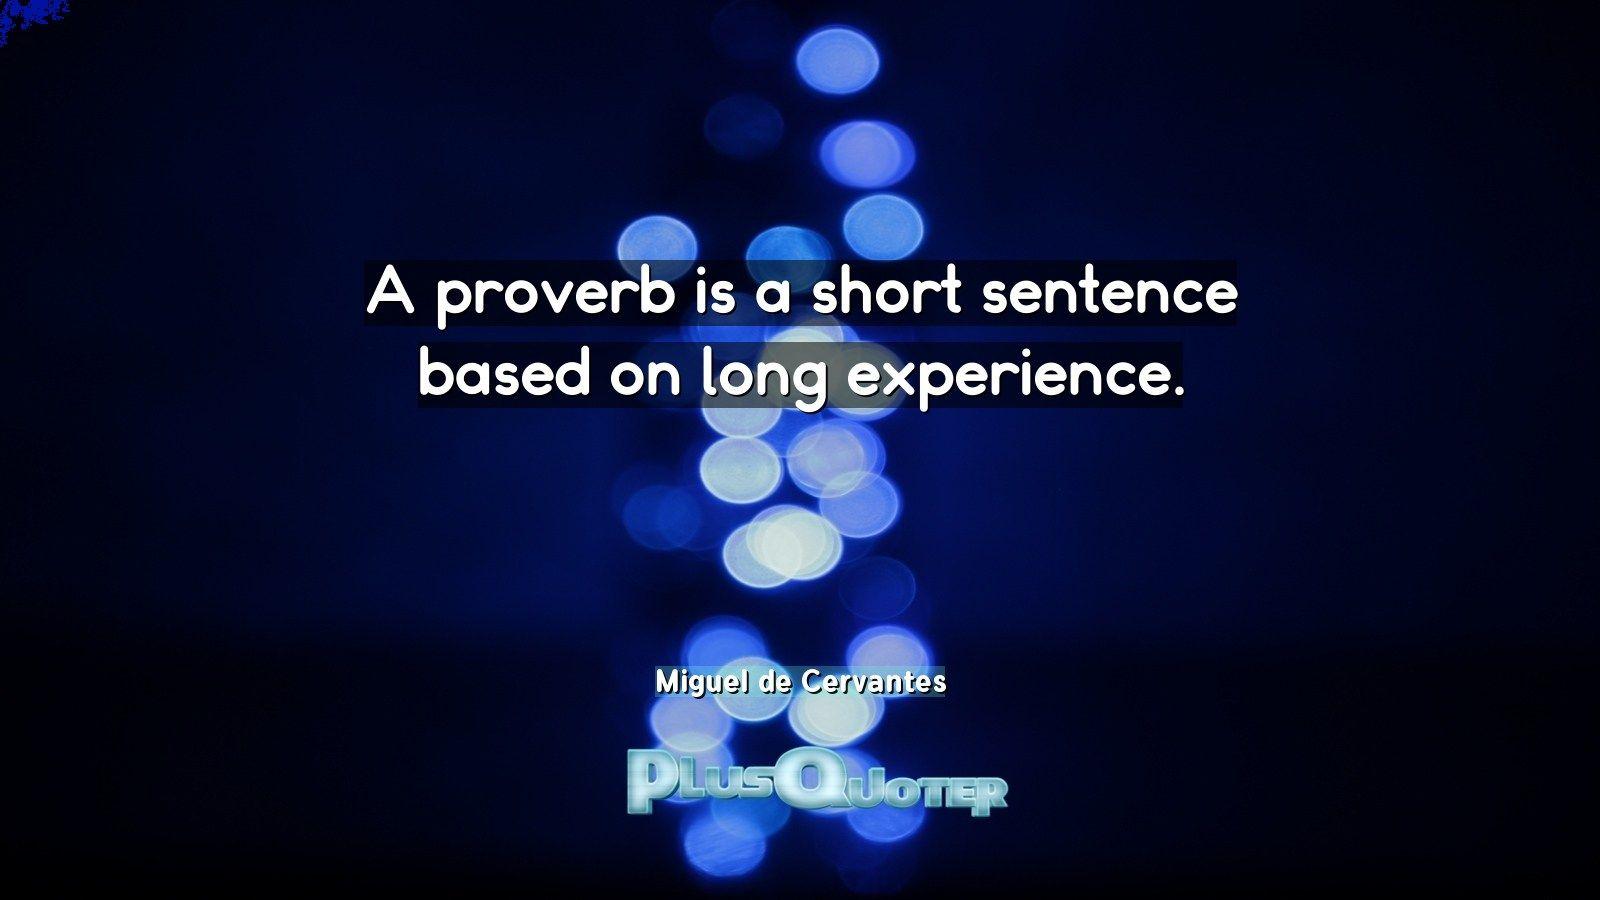 A proverb is a short sentence based on long experience- Miguel de